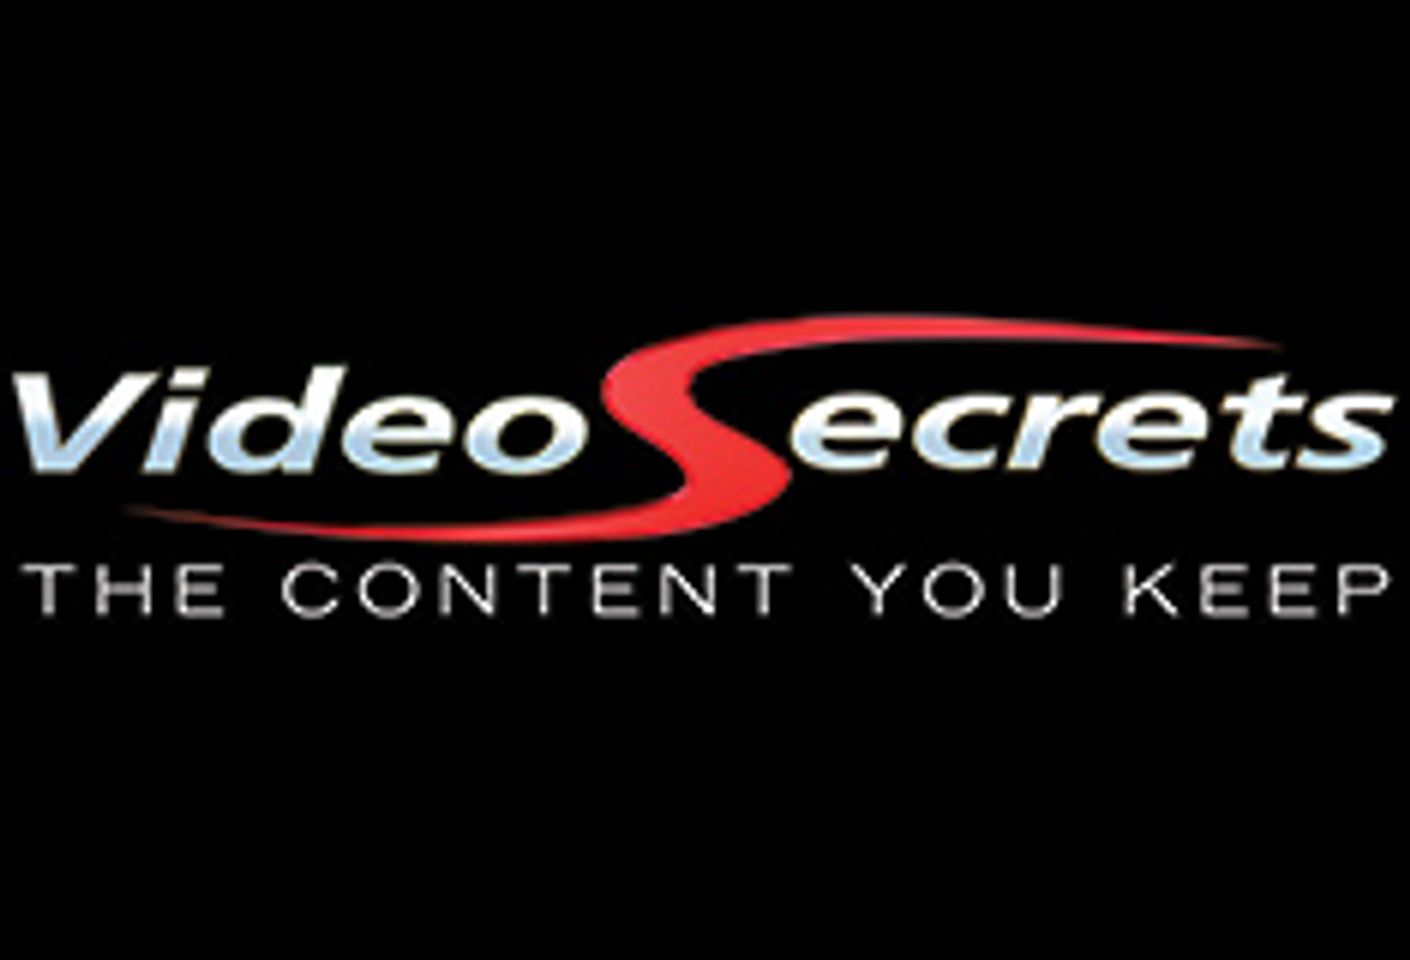 Tim Siner hired As Director of Business Development For Video Secrets